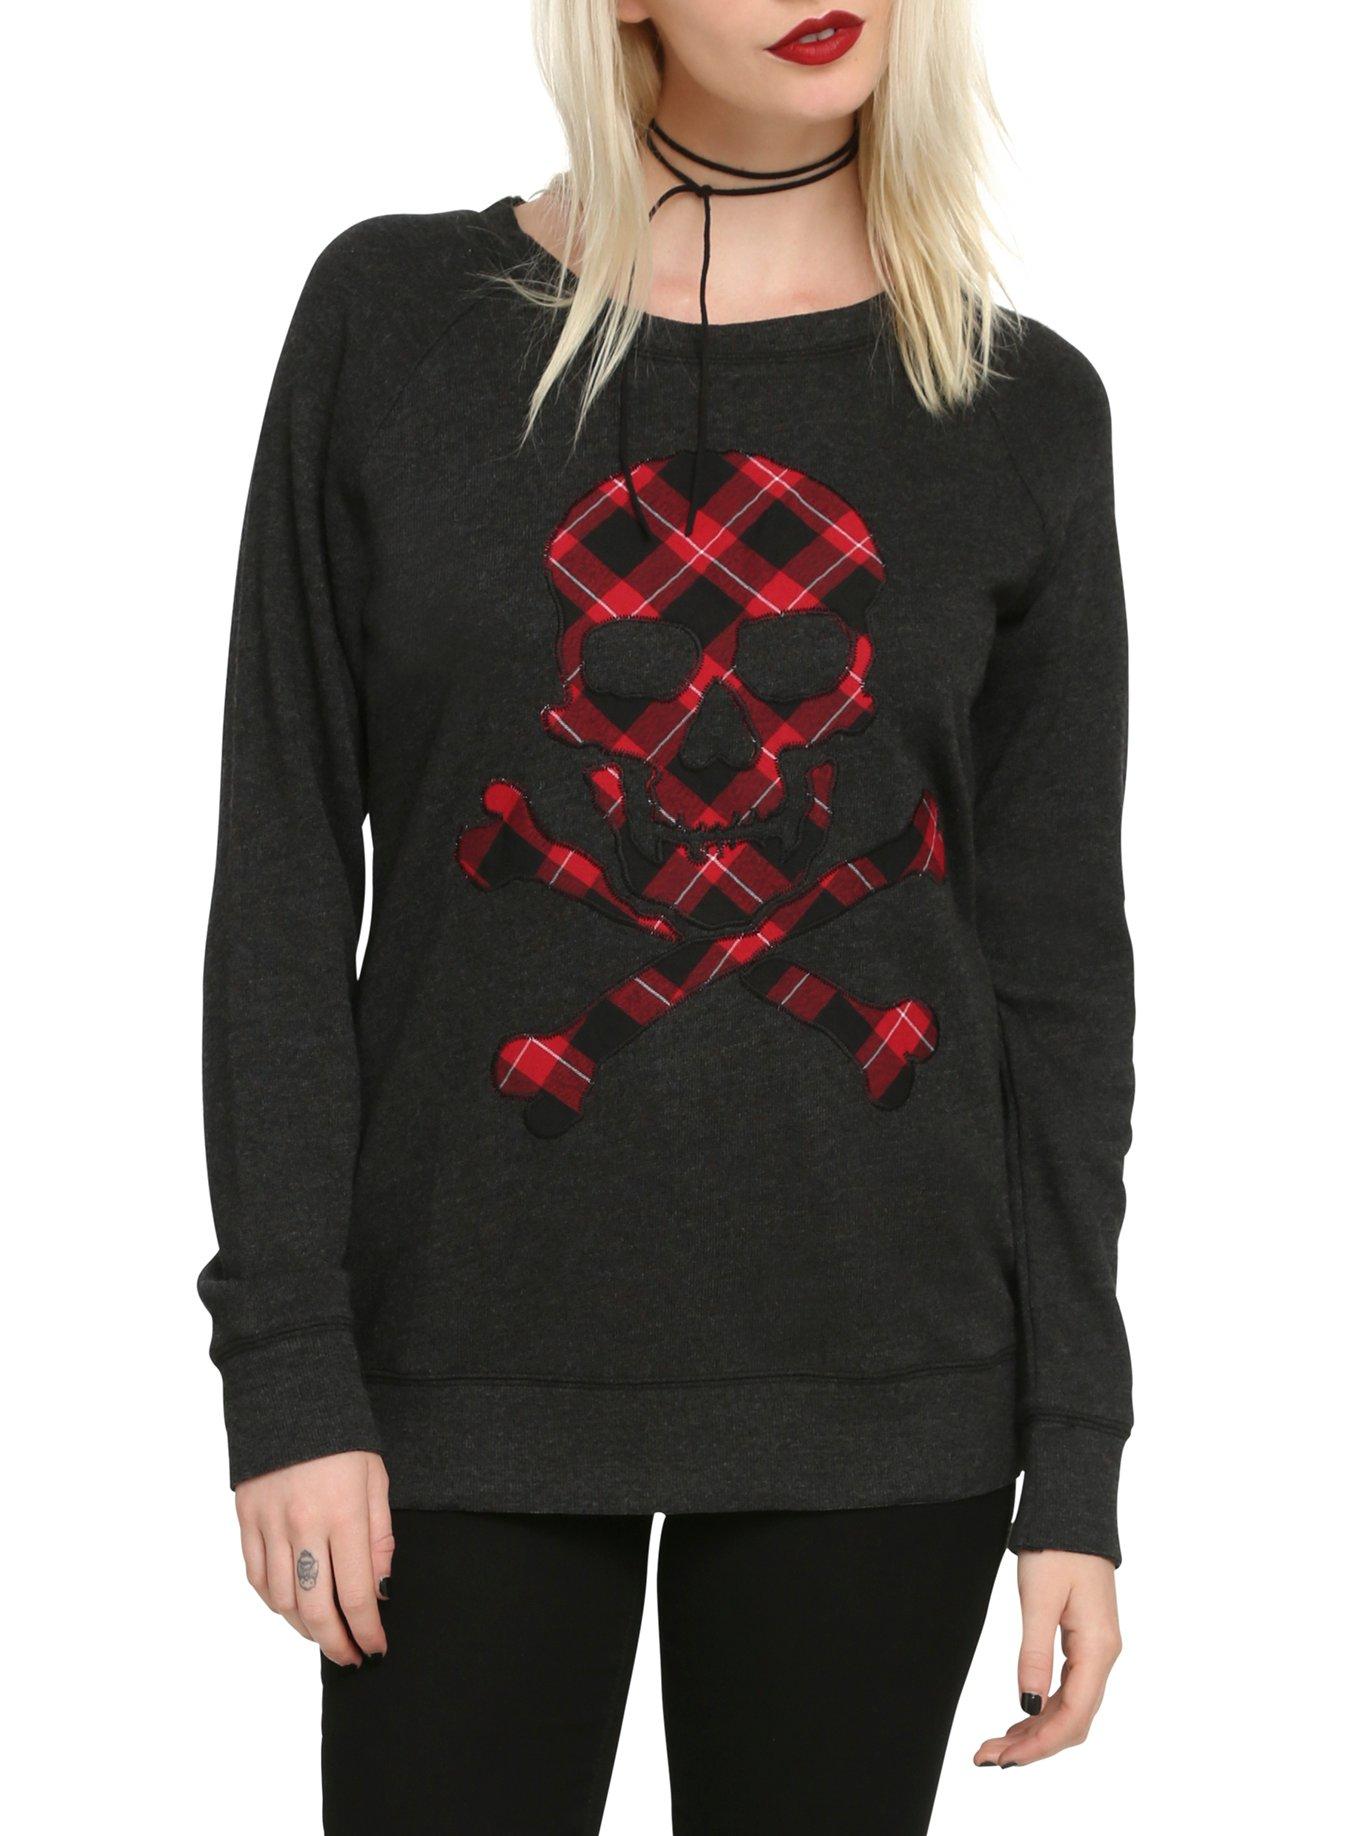 Grey and Red Plaid Skull Girls Pullover Top, BLACK, hi-res